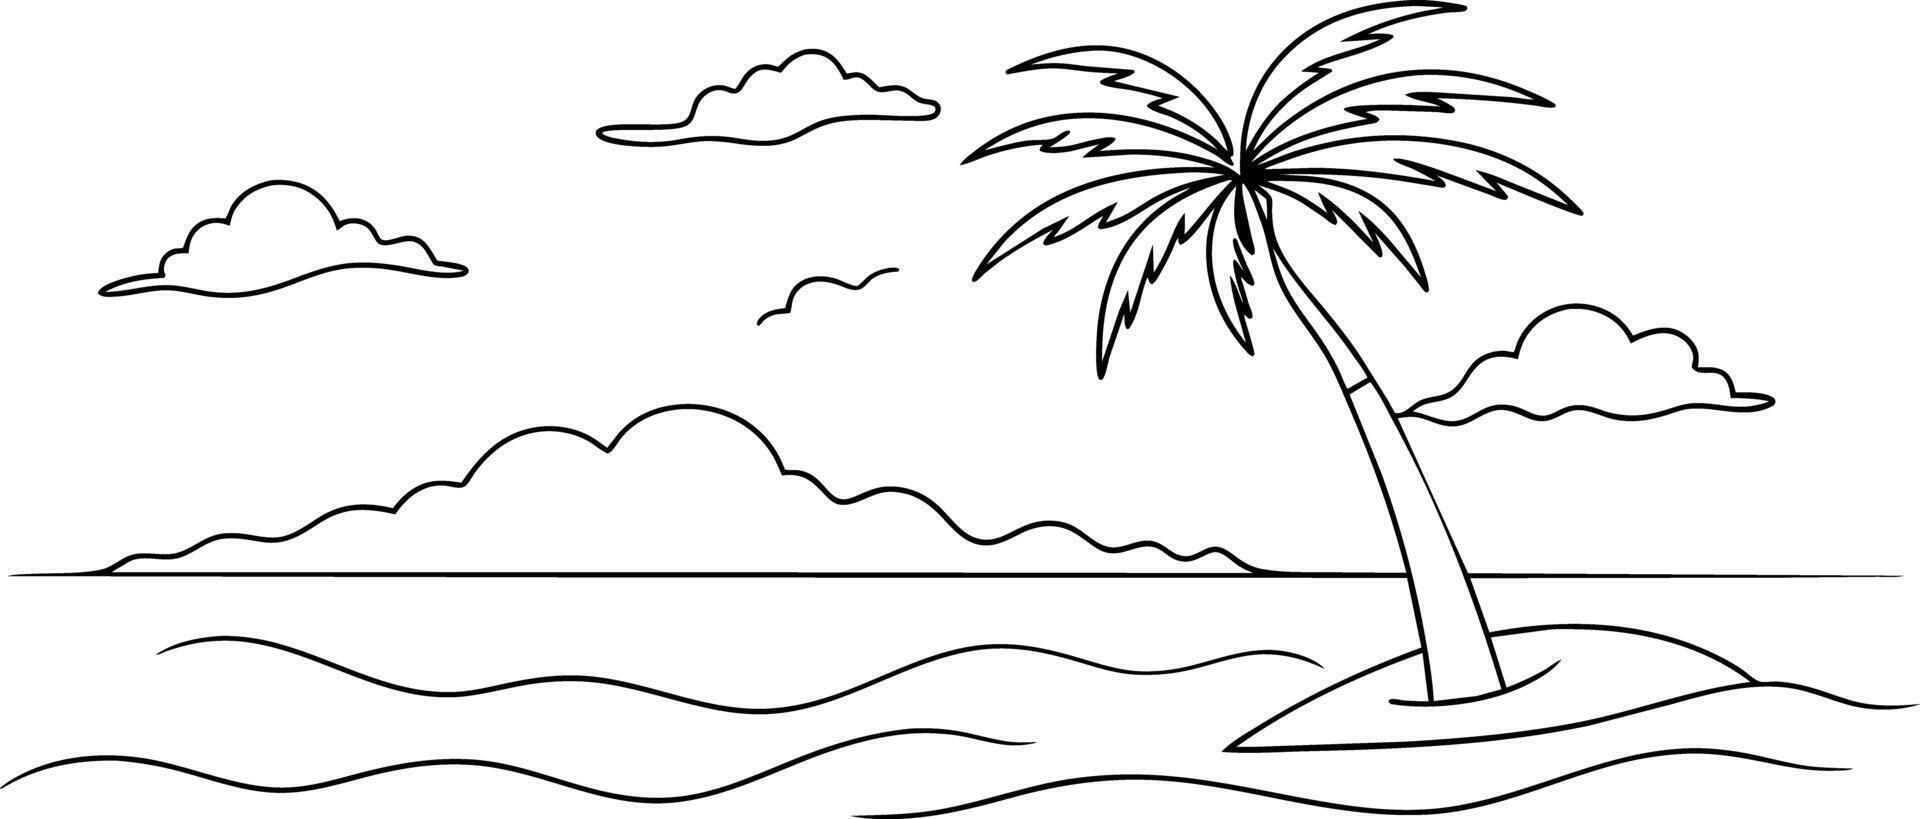 a palm tree and a beach scene coloring page vector